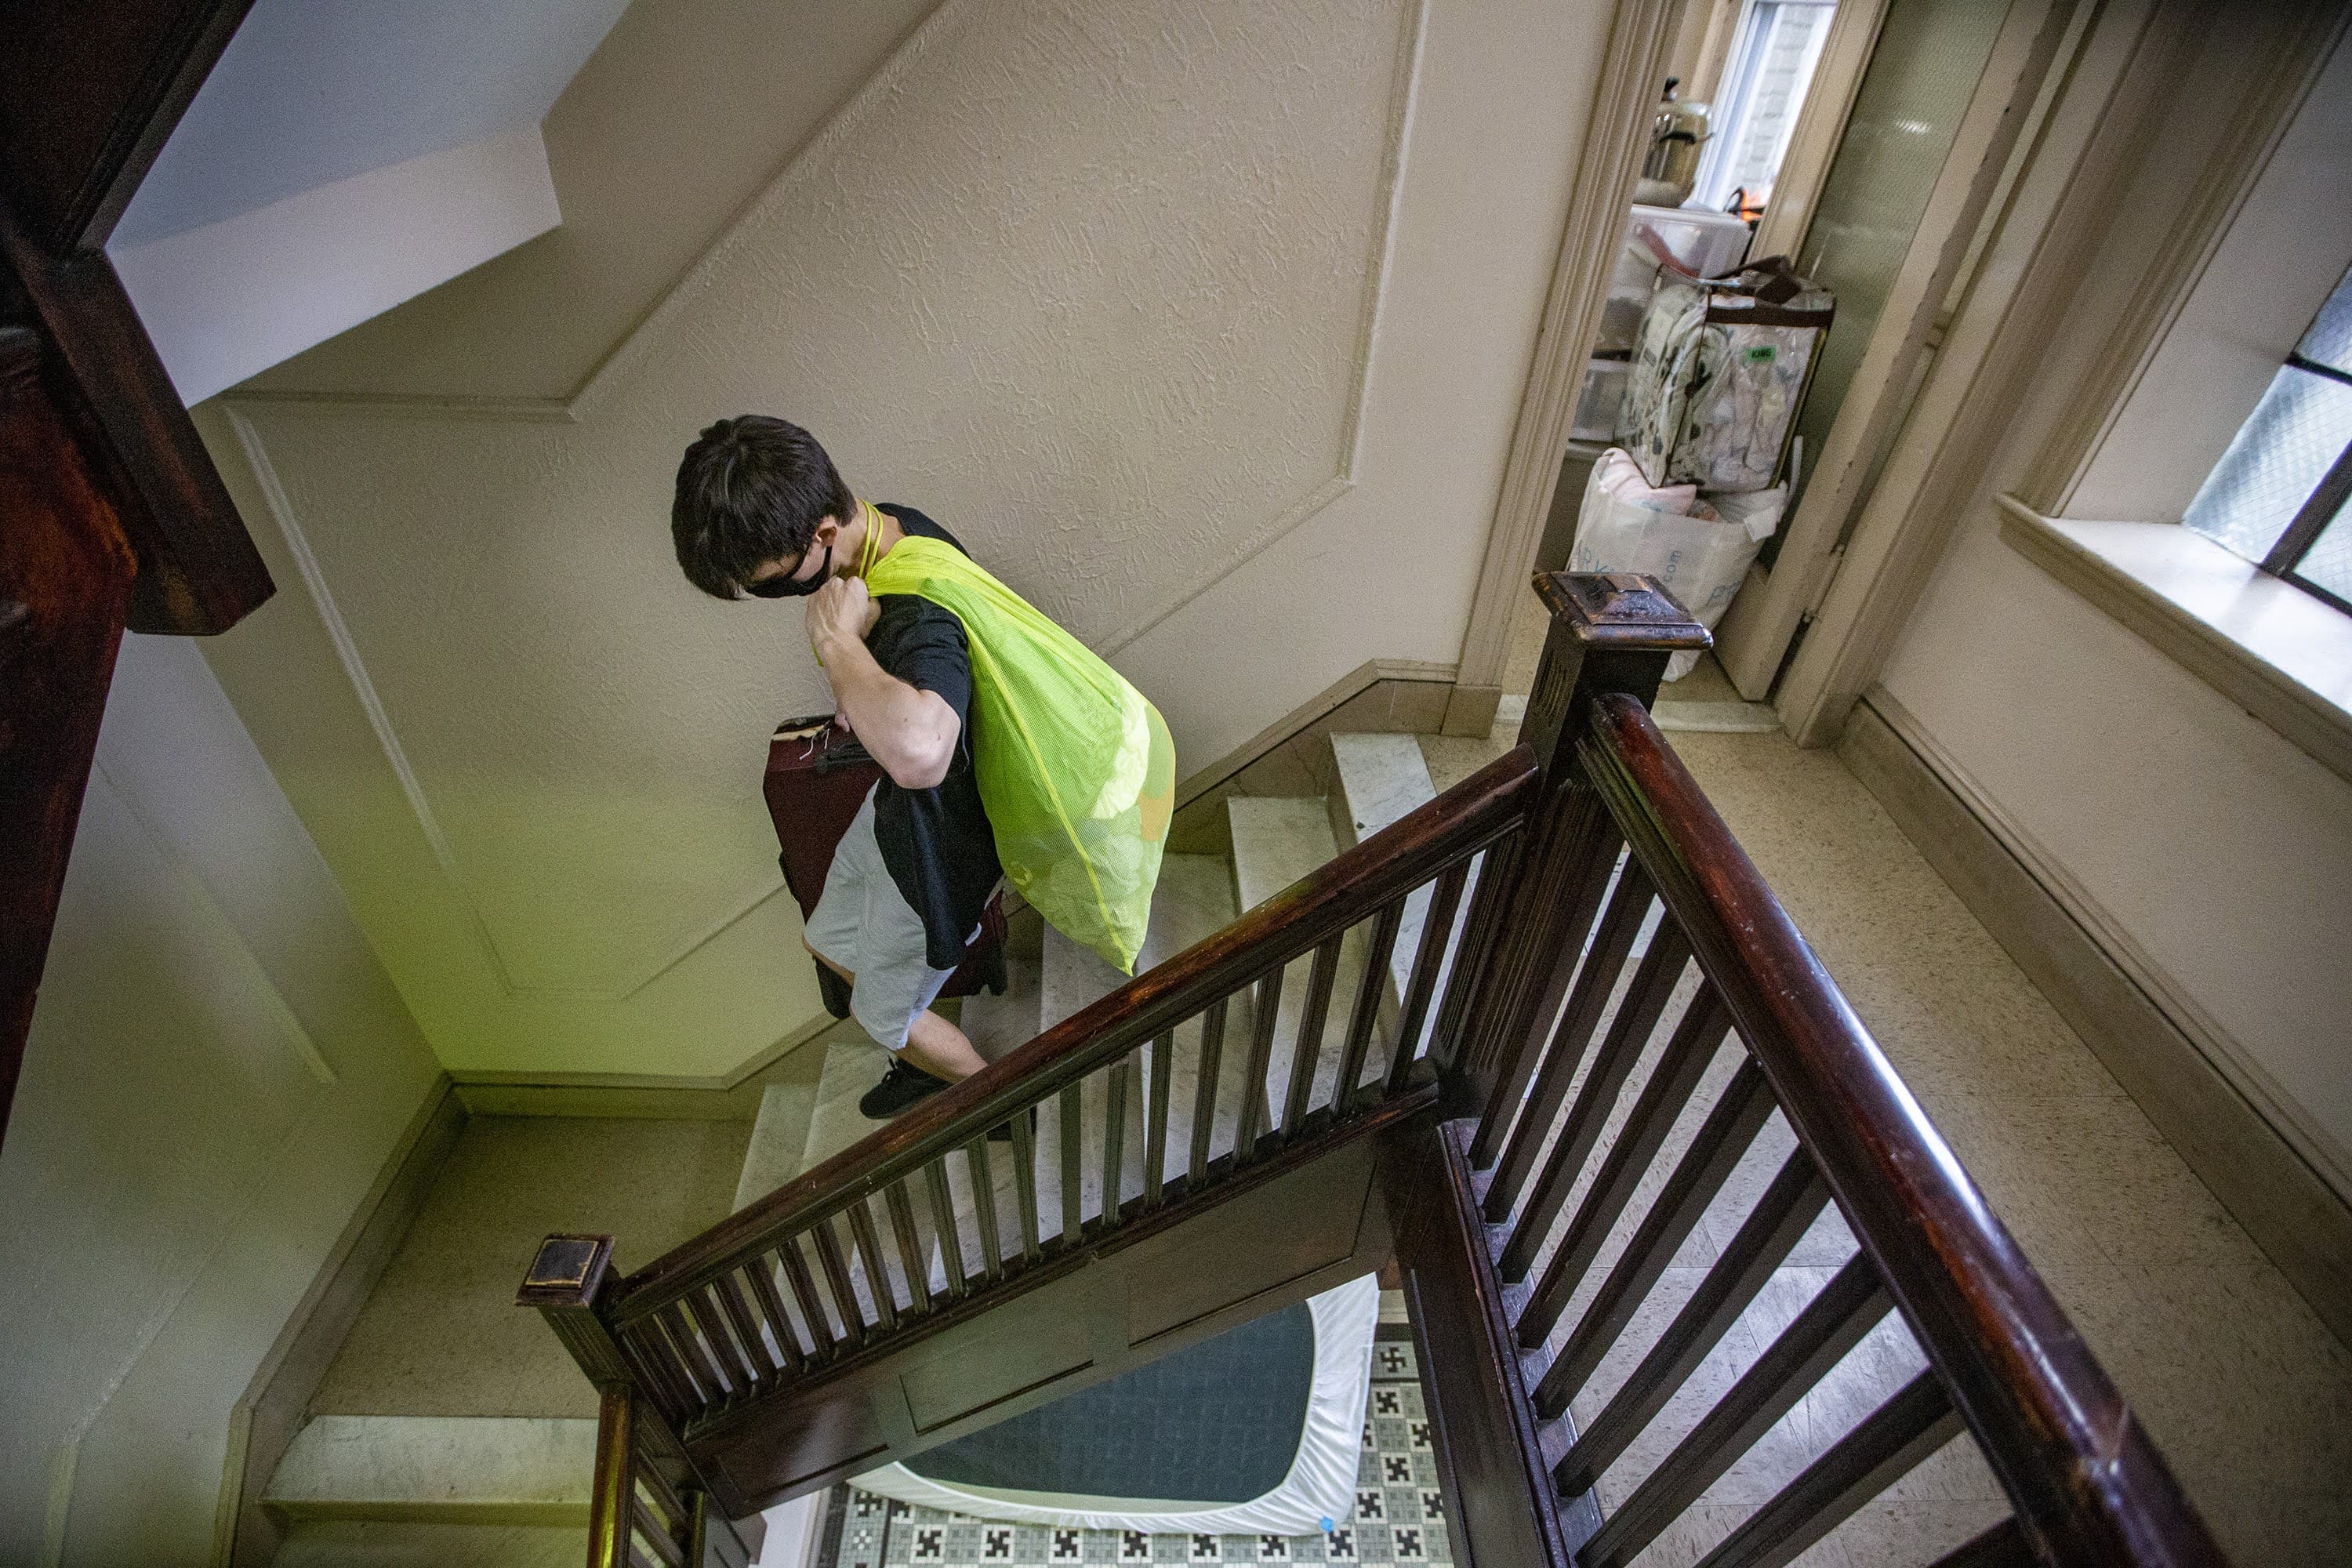 Mike Totten carries some of his belongings down the stairwell of his girlfriend’s apartment building while moving. (Jesse Costa/WBUR)